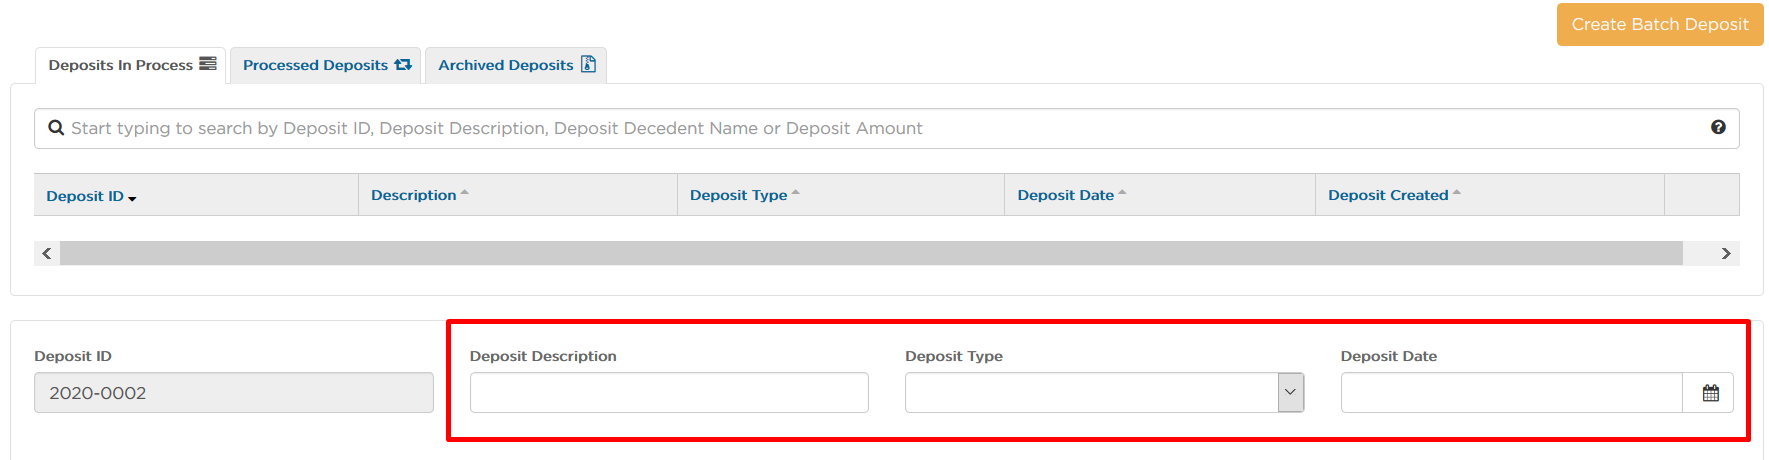 select "Create Batch Deposit" and fill in Description, Type, and Date